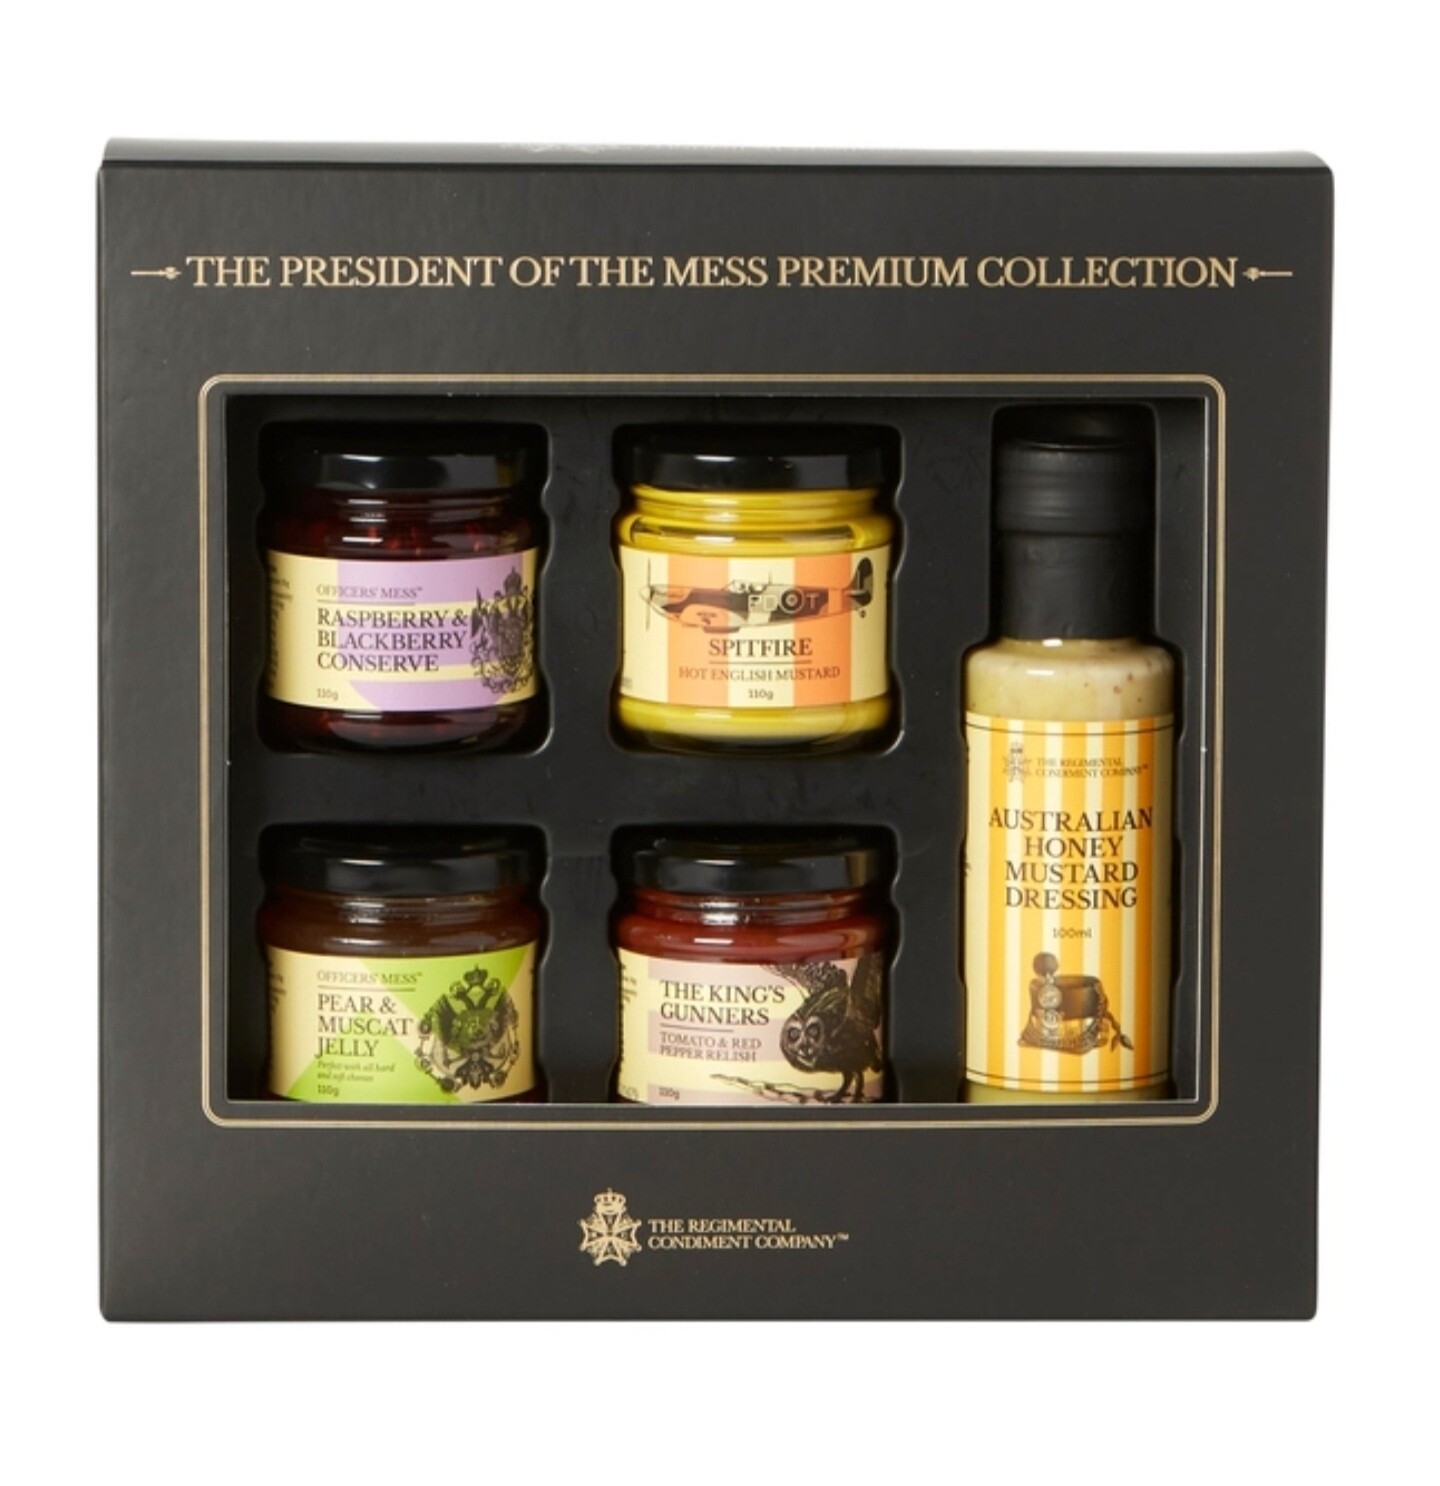 The Regimental Condiment Company The President of the Mess Premium Collection Gift Box 440g & 100ml